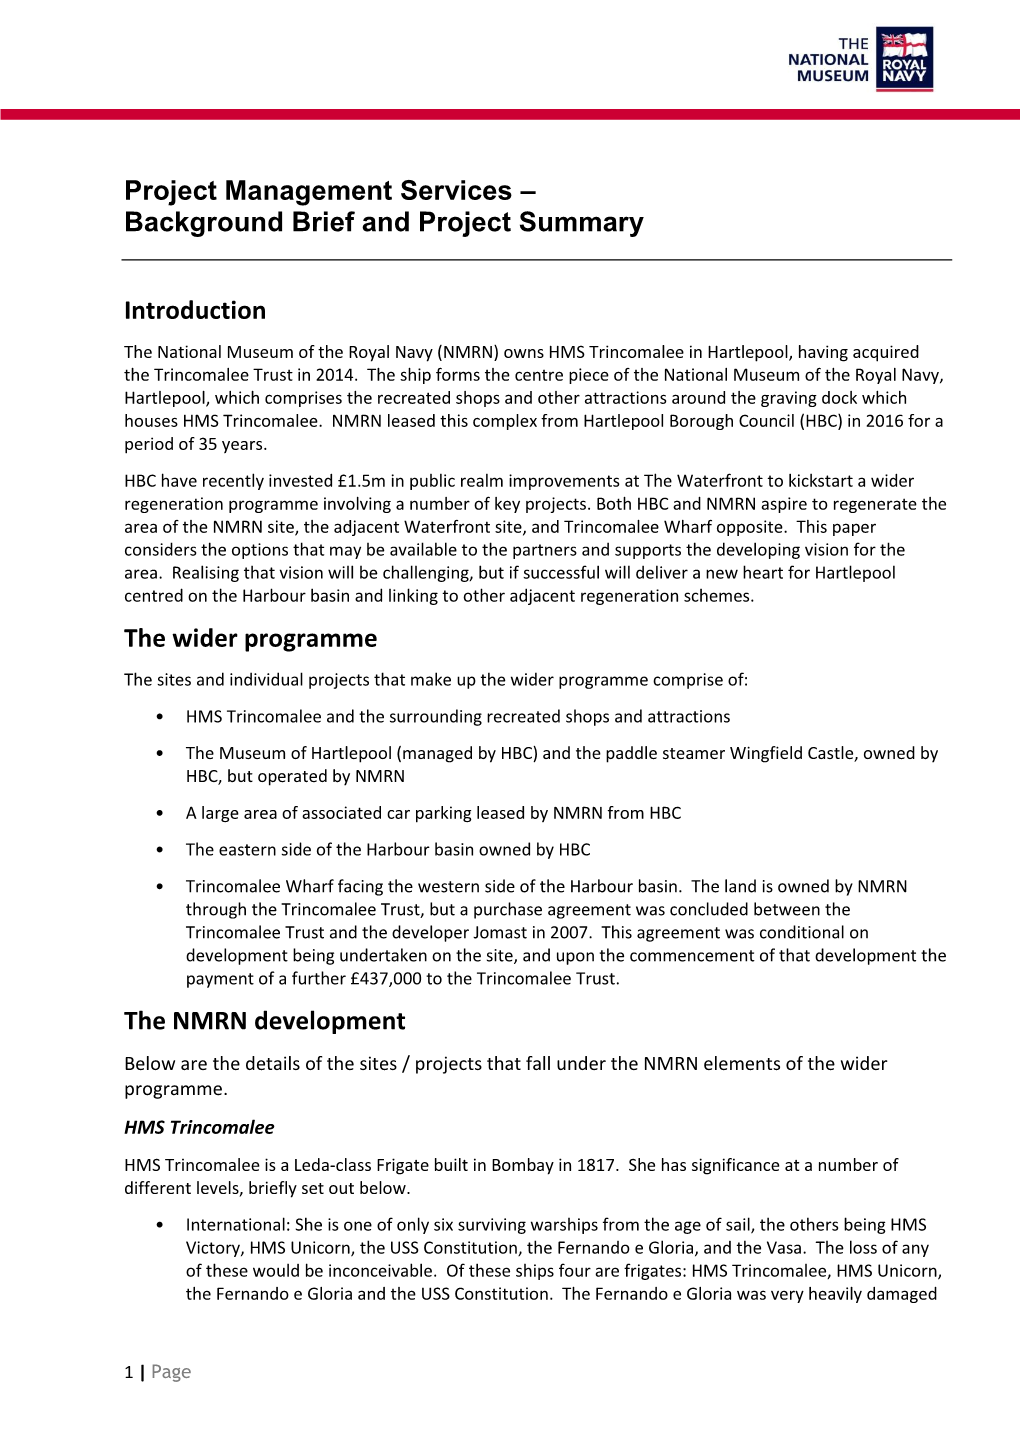 Background and Project Outline (PDF)